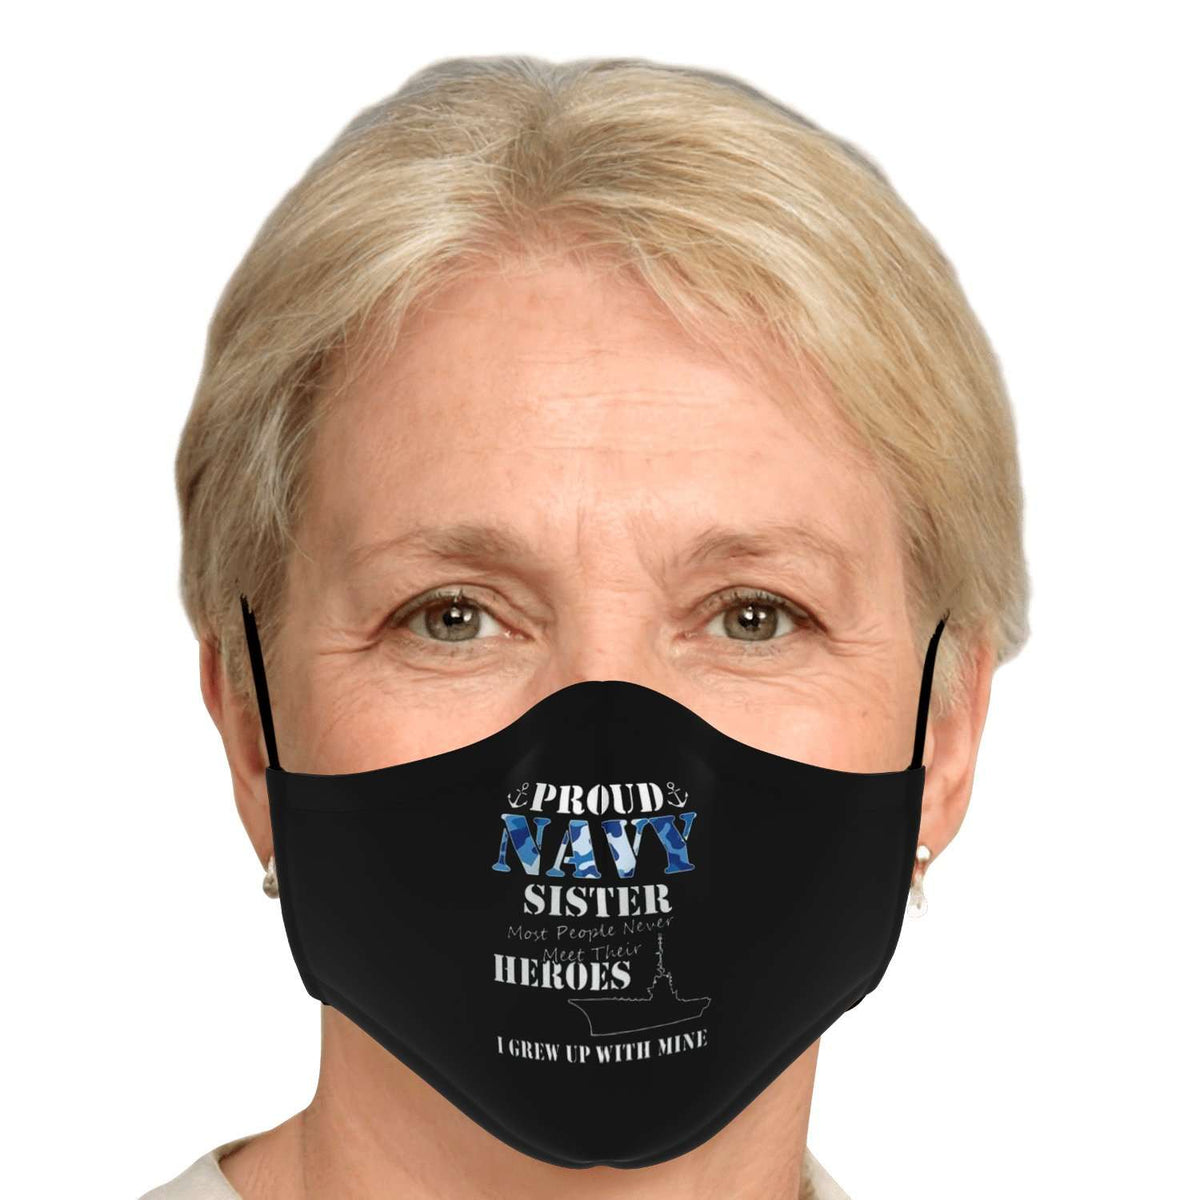 Designs by MyUtopia Shout Out:Proud Navy Sister I Grew Up With My Hero Fitted Fabric Face Mask with Adjustable Ear Loops,Adult / Single / No filters,Fabric Face Mask